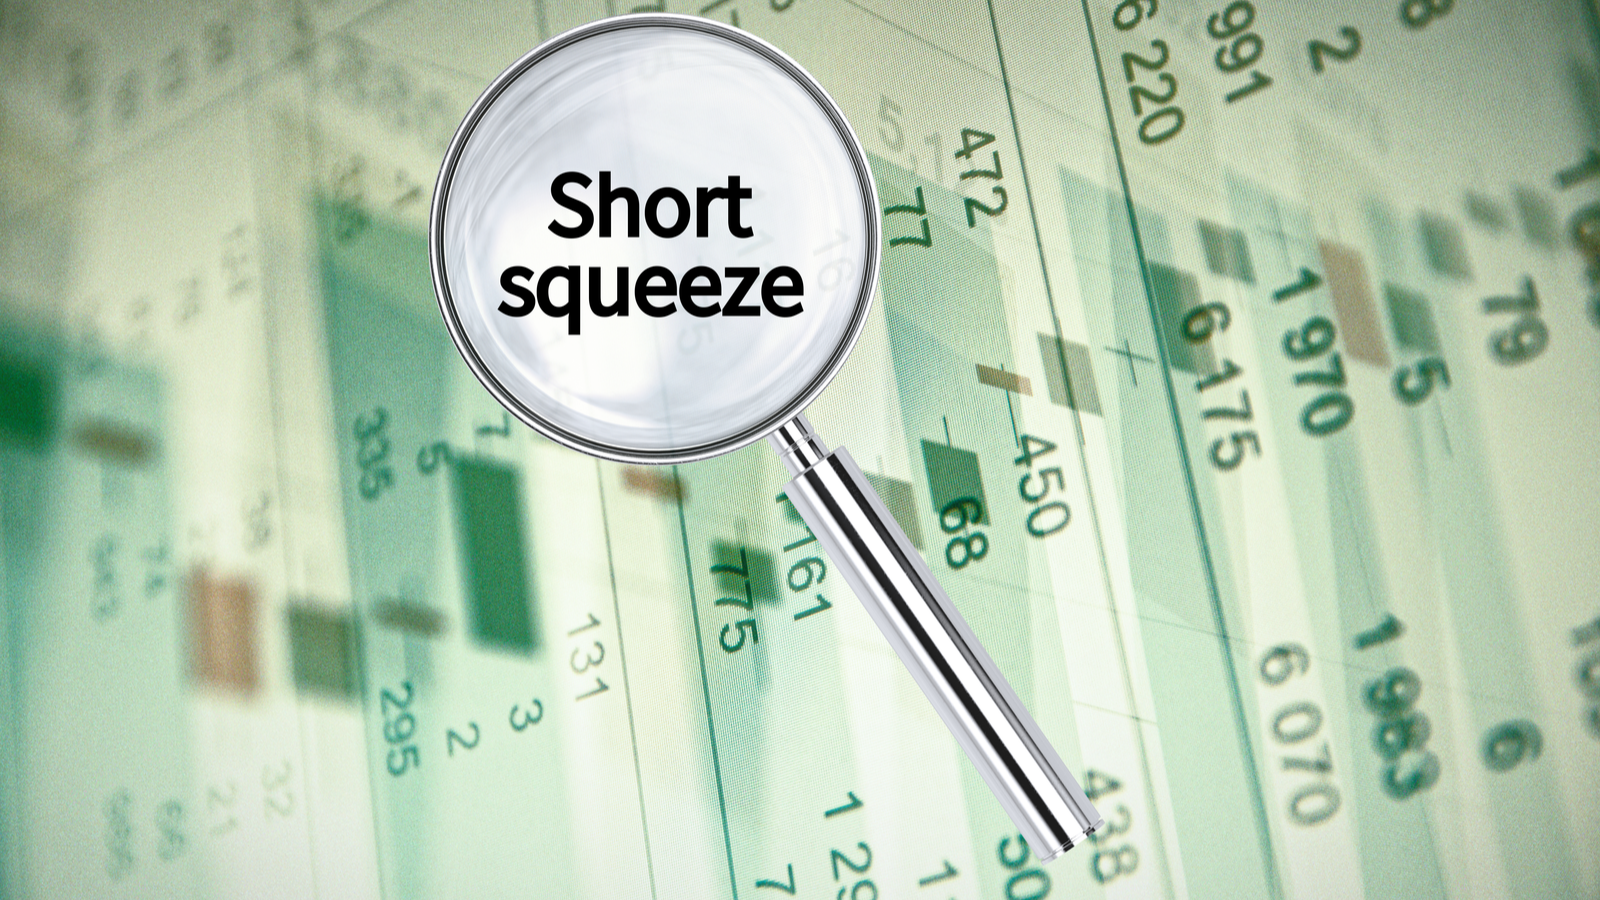 Magnifying lens over background with text Short squeeze, with the financial data visible in the background. 3D rendering., ATER is experiencing a short squeeze